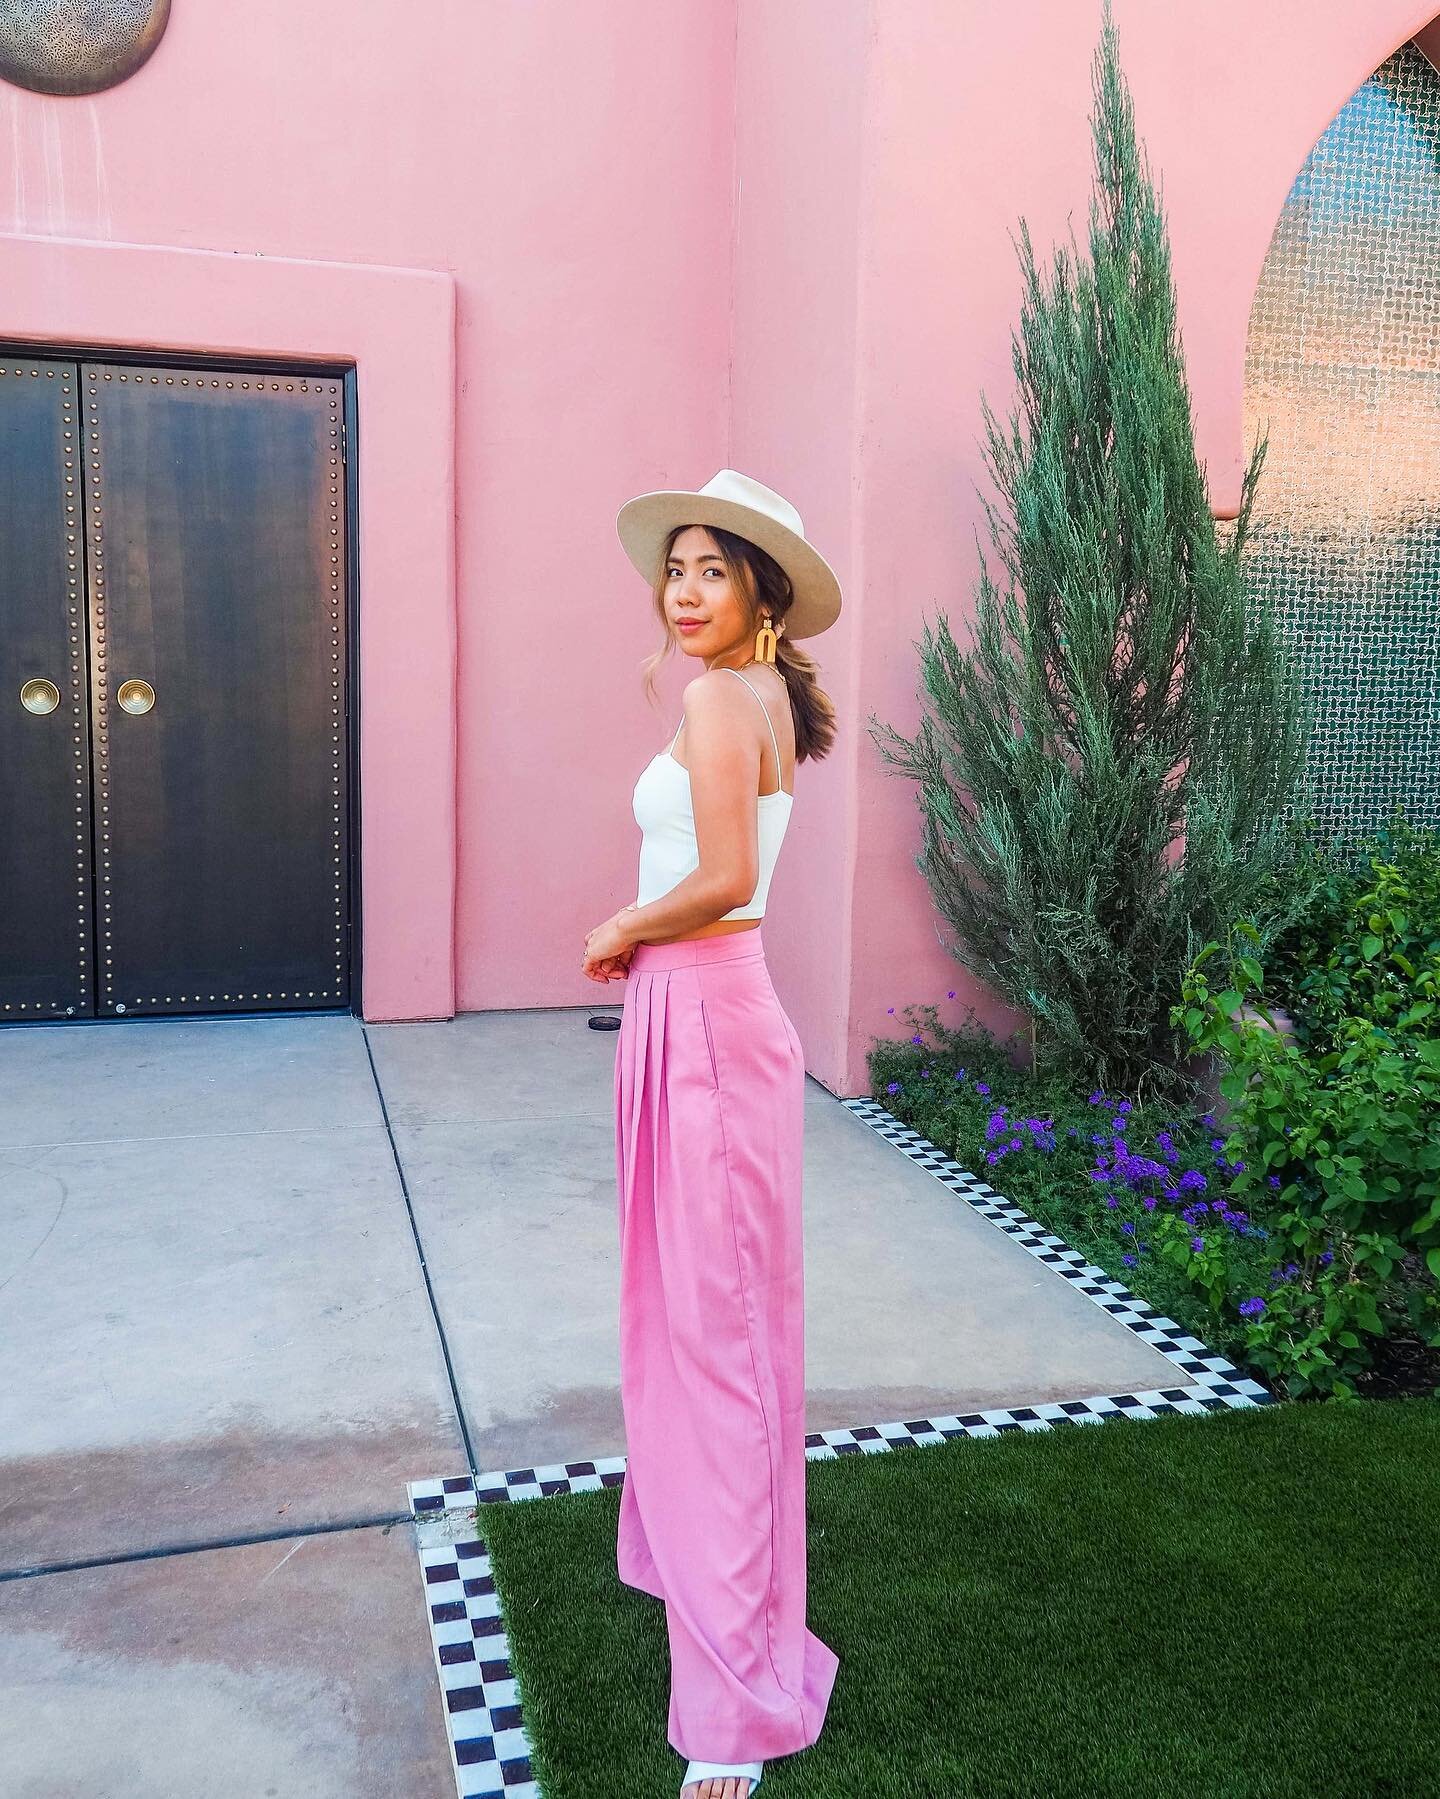 Go Pink or Go Home 💕✌️ Every girl needs a bright ensemble and statement jewelry for this desert oasis, especially if you're visiting the famous Moroccan-themed hotel and #ThatPinkDoor.

More on the blog &ndash; link in bio #whensheroams #travelstyle